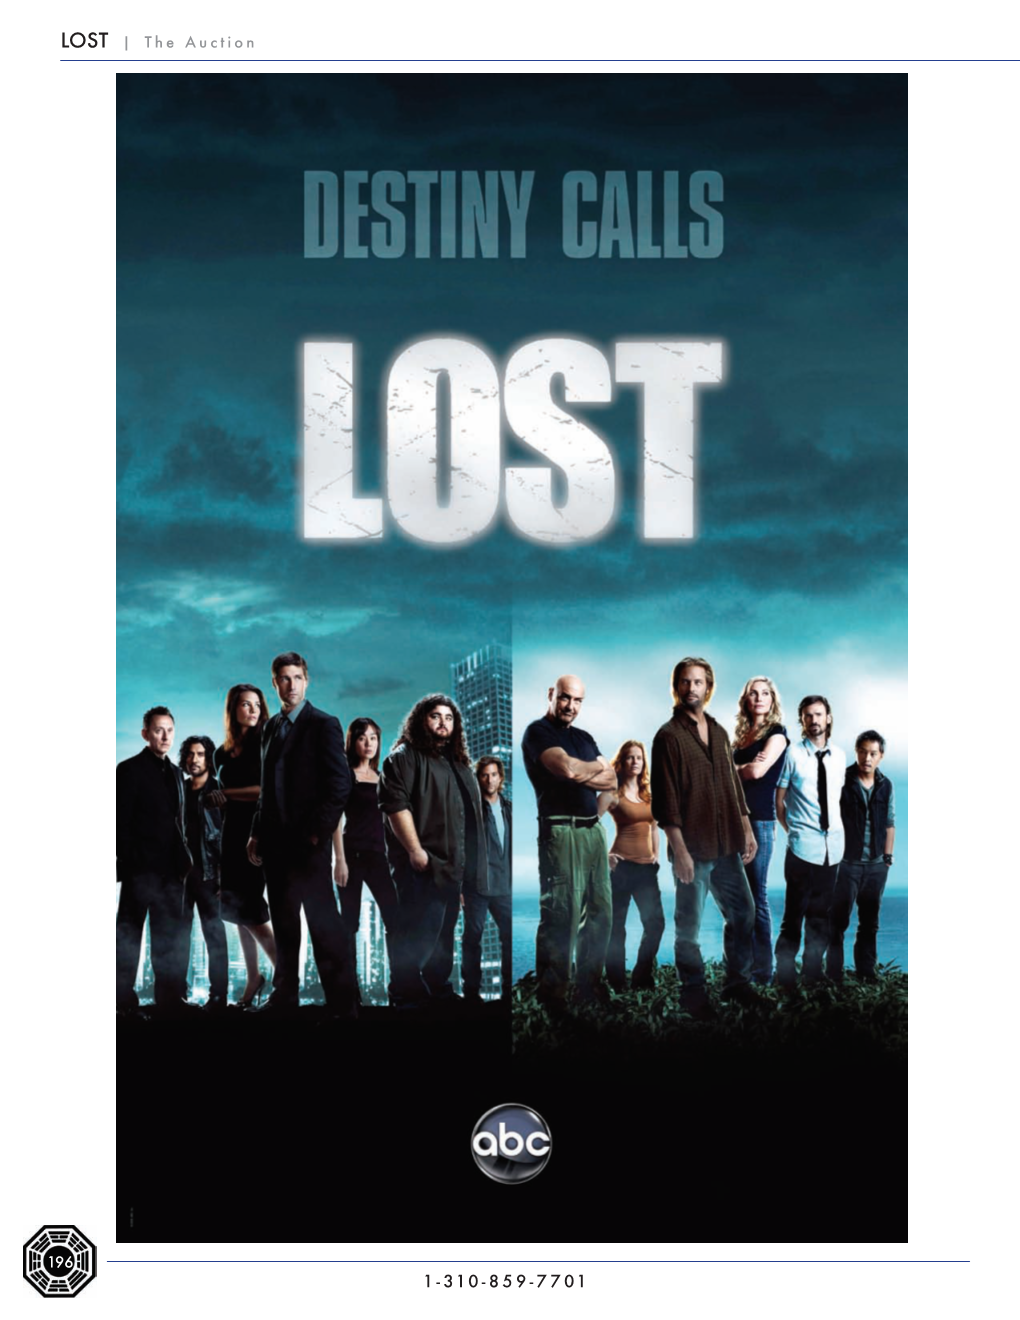 LOST | the Auction